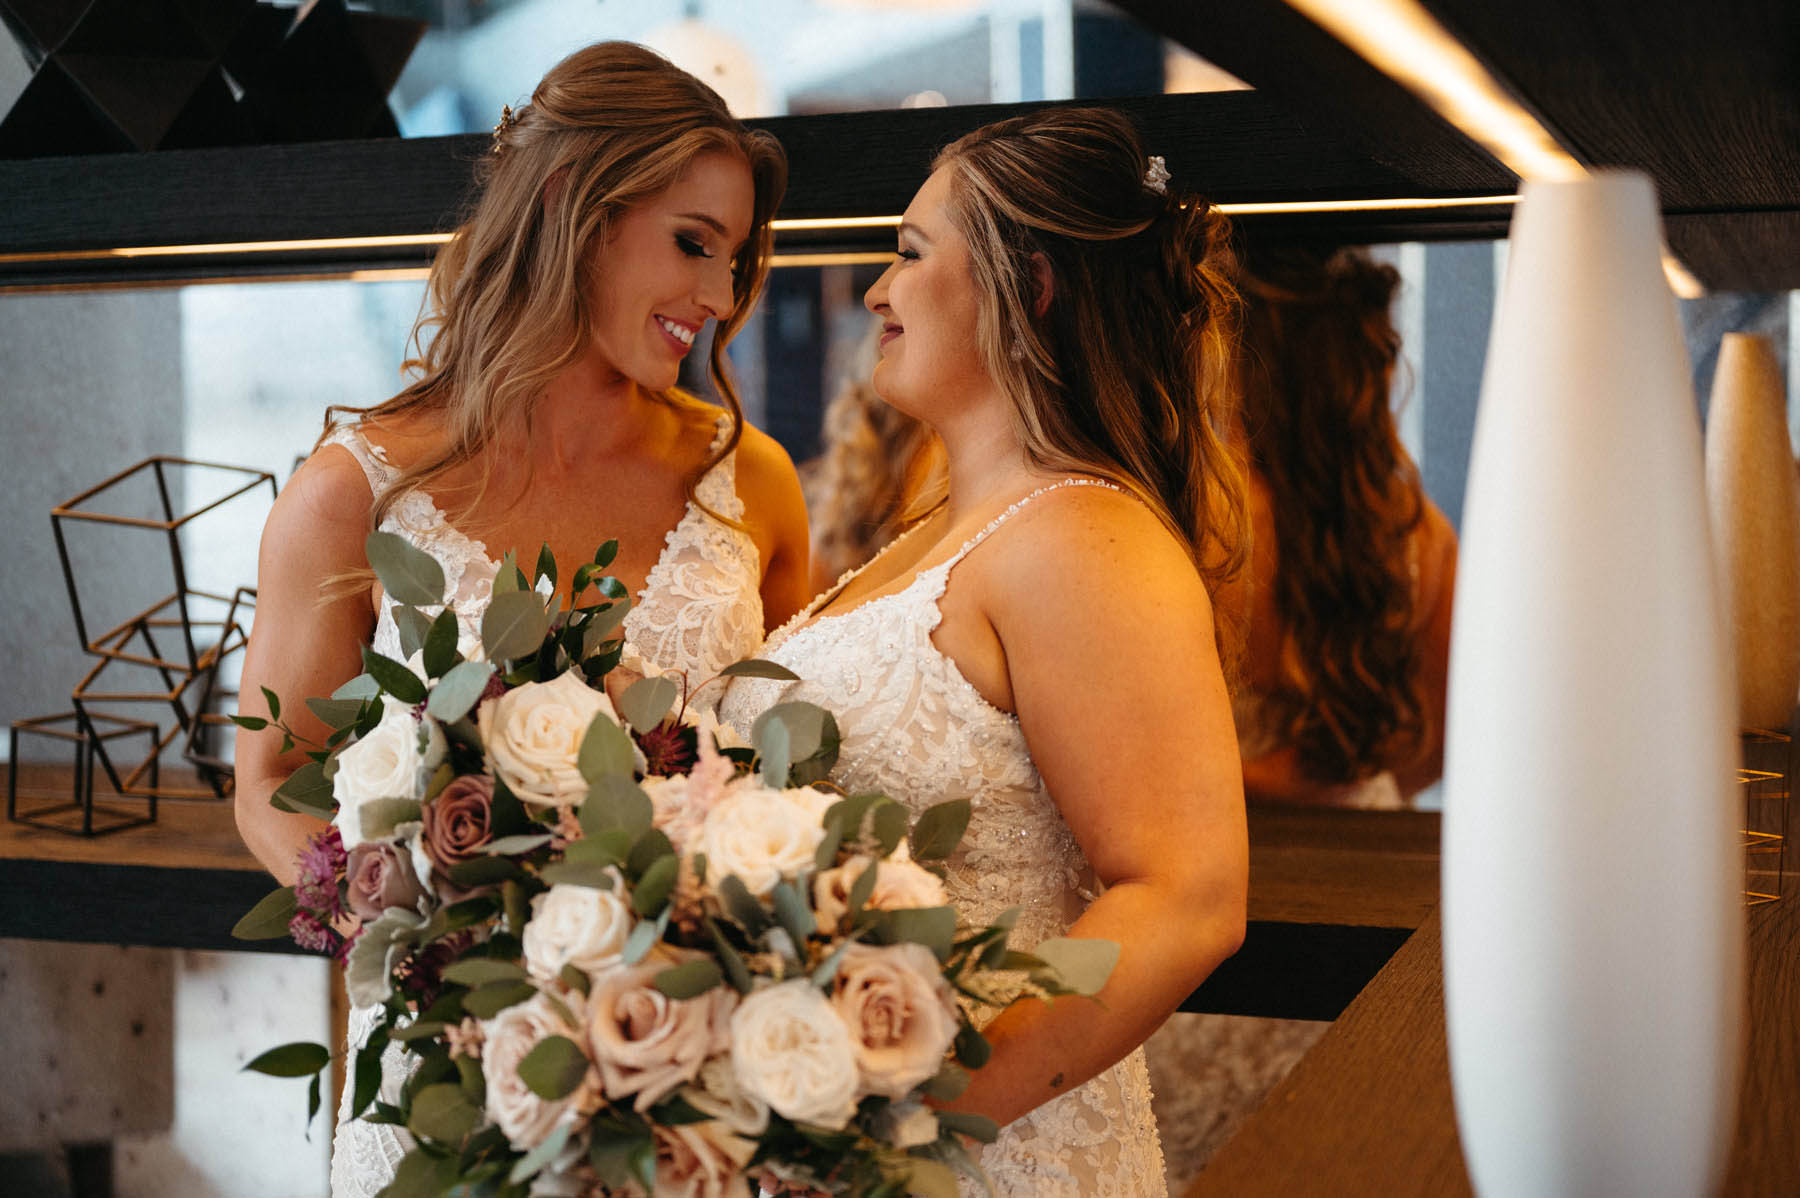 The brides stand in front of a mirror with their bouquets, smiling at each other.